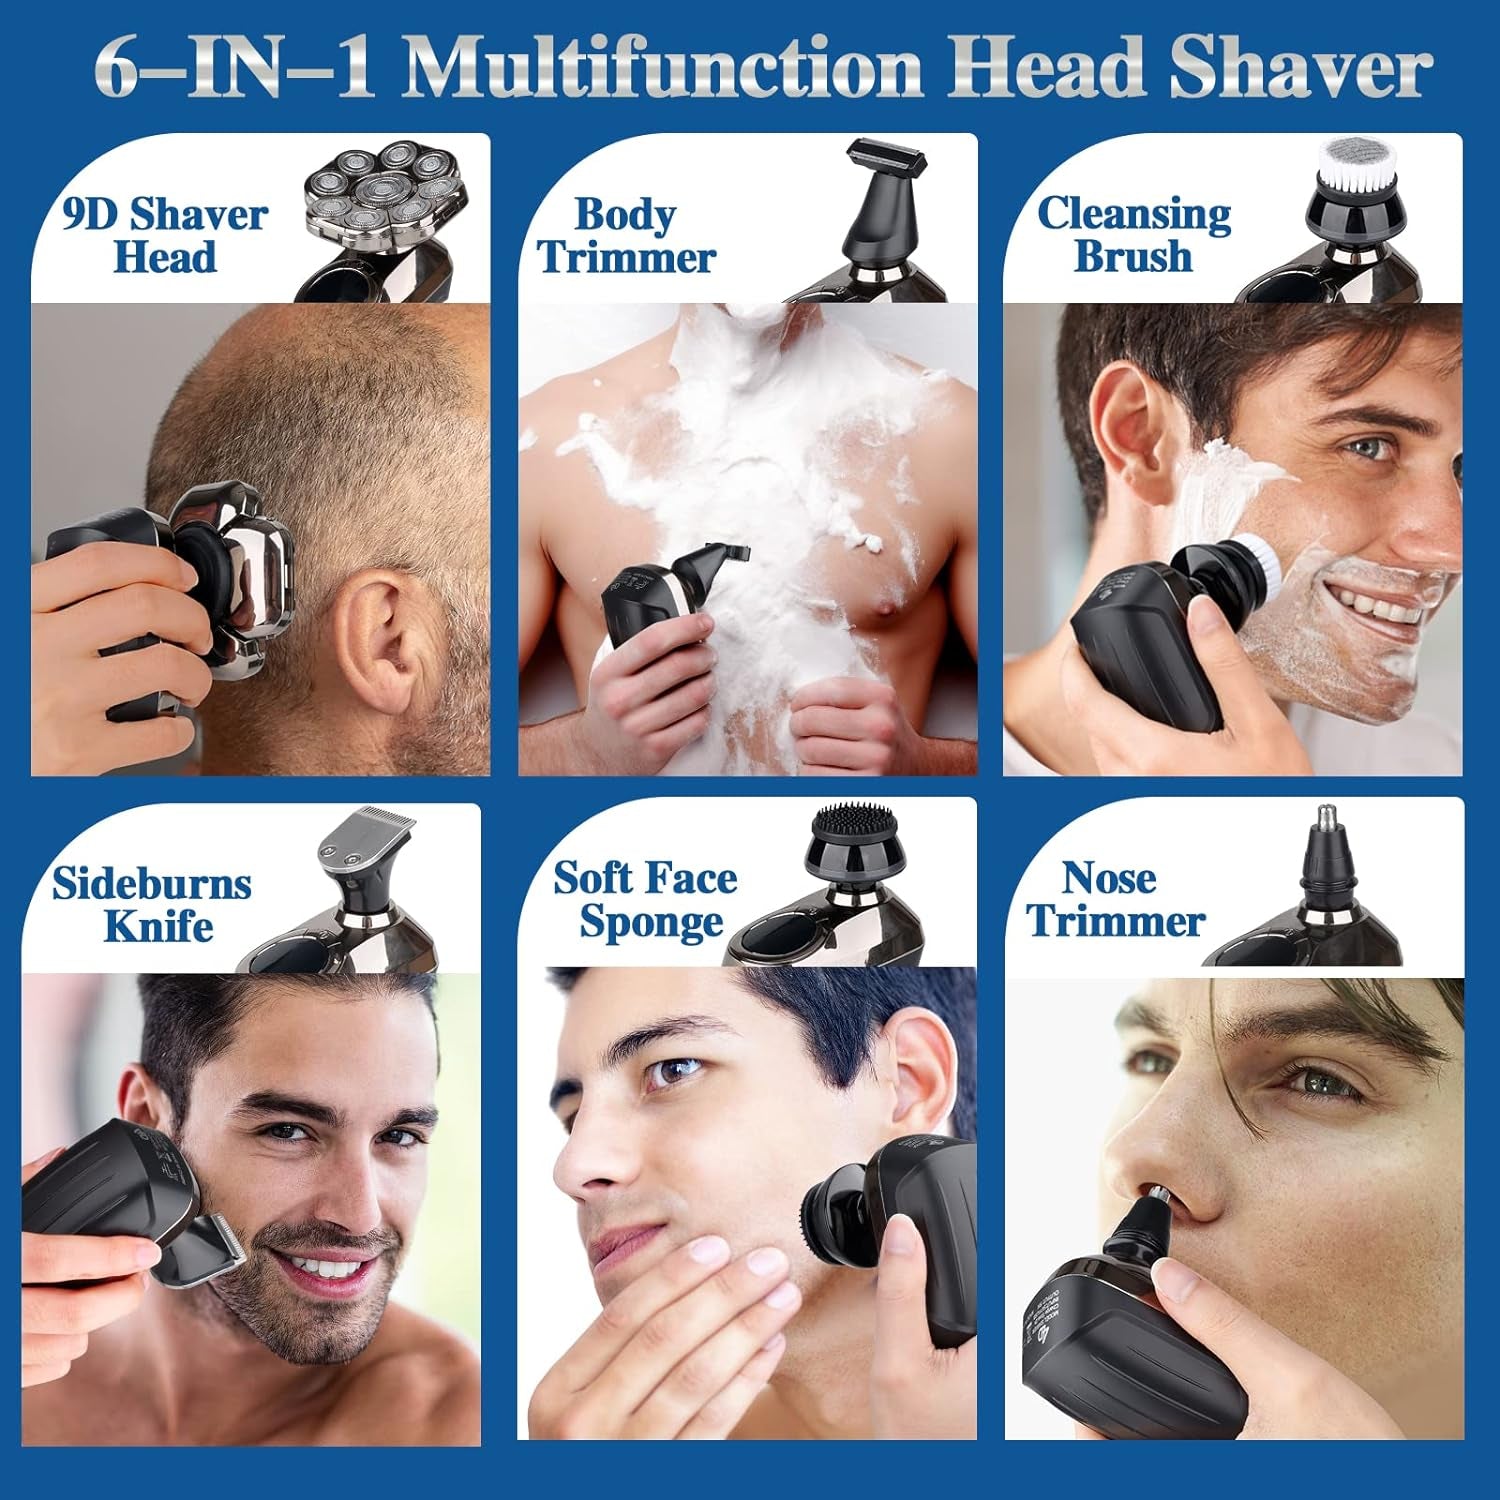 9D Electric Head Shaver for Bald Men, Upgraded 6-In-1 Head Shaver for Bald Men, Waterproof Wet/Dry Grooming Kit Electric Shaver for Men, Cordless Rechargeable Bald Head Razor for Home&Travel Gift